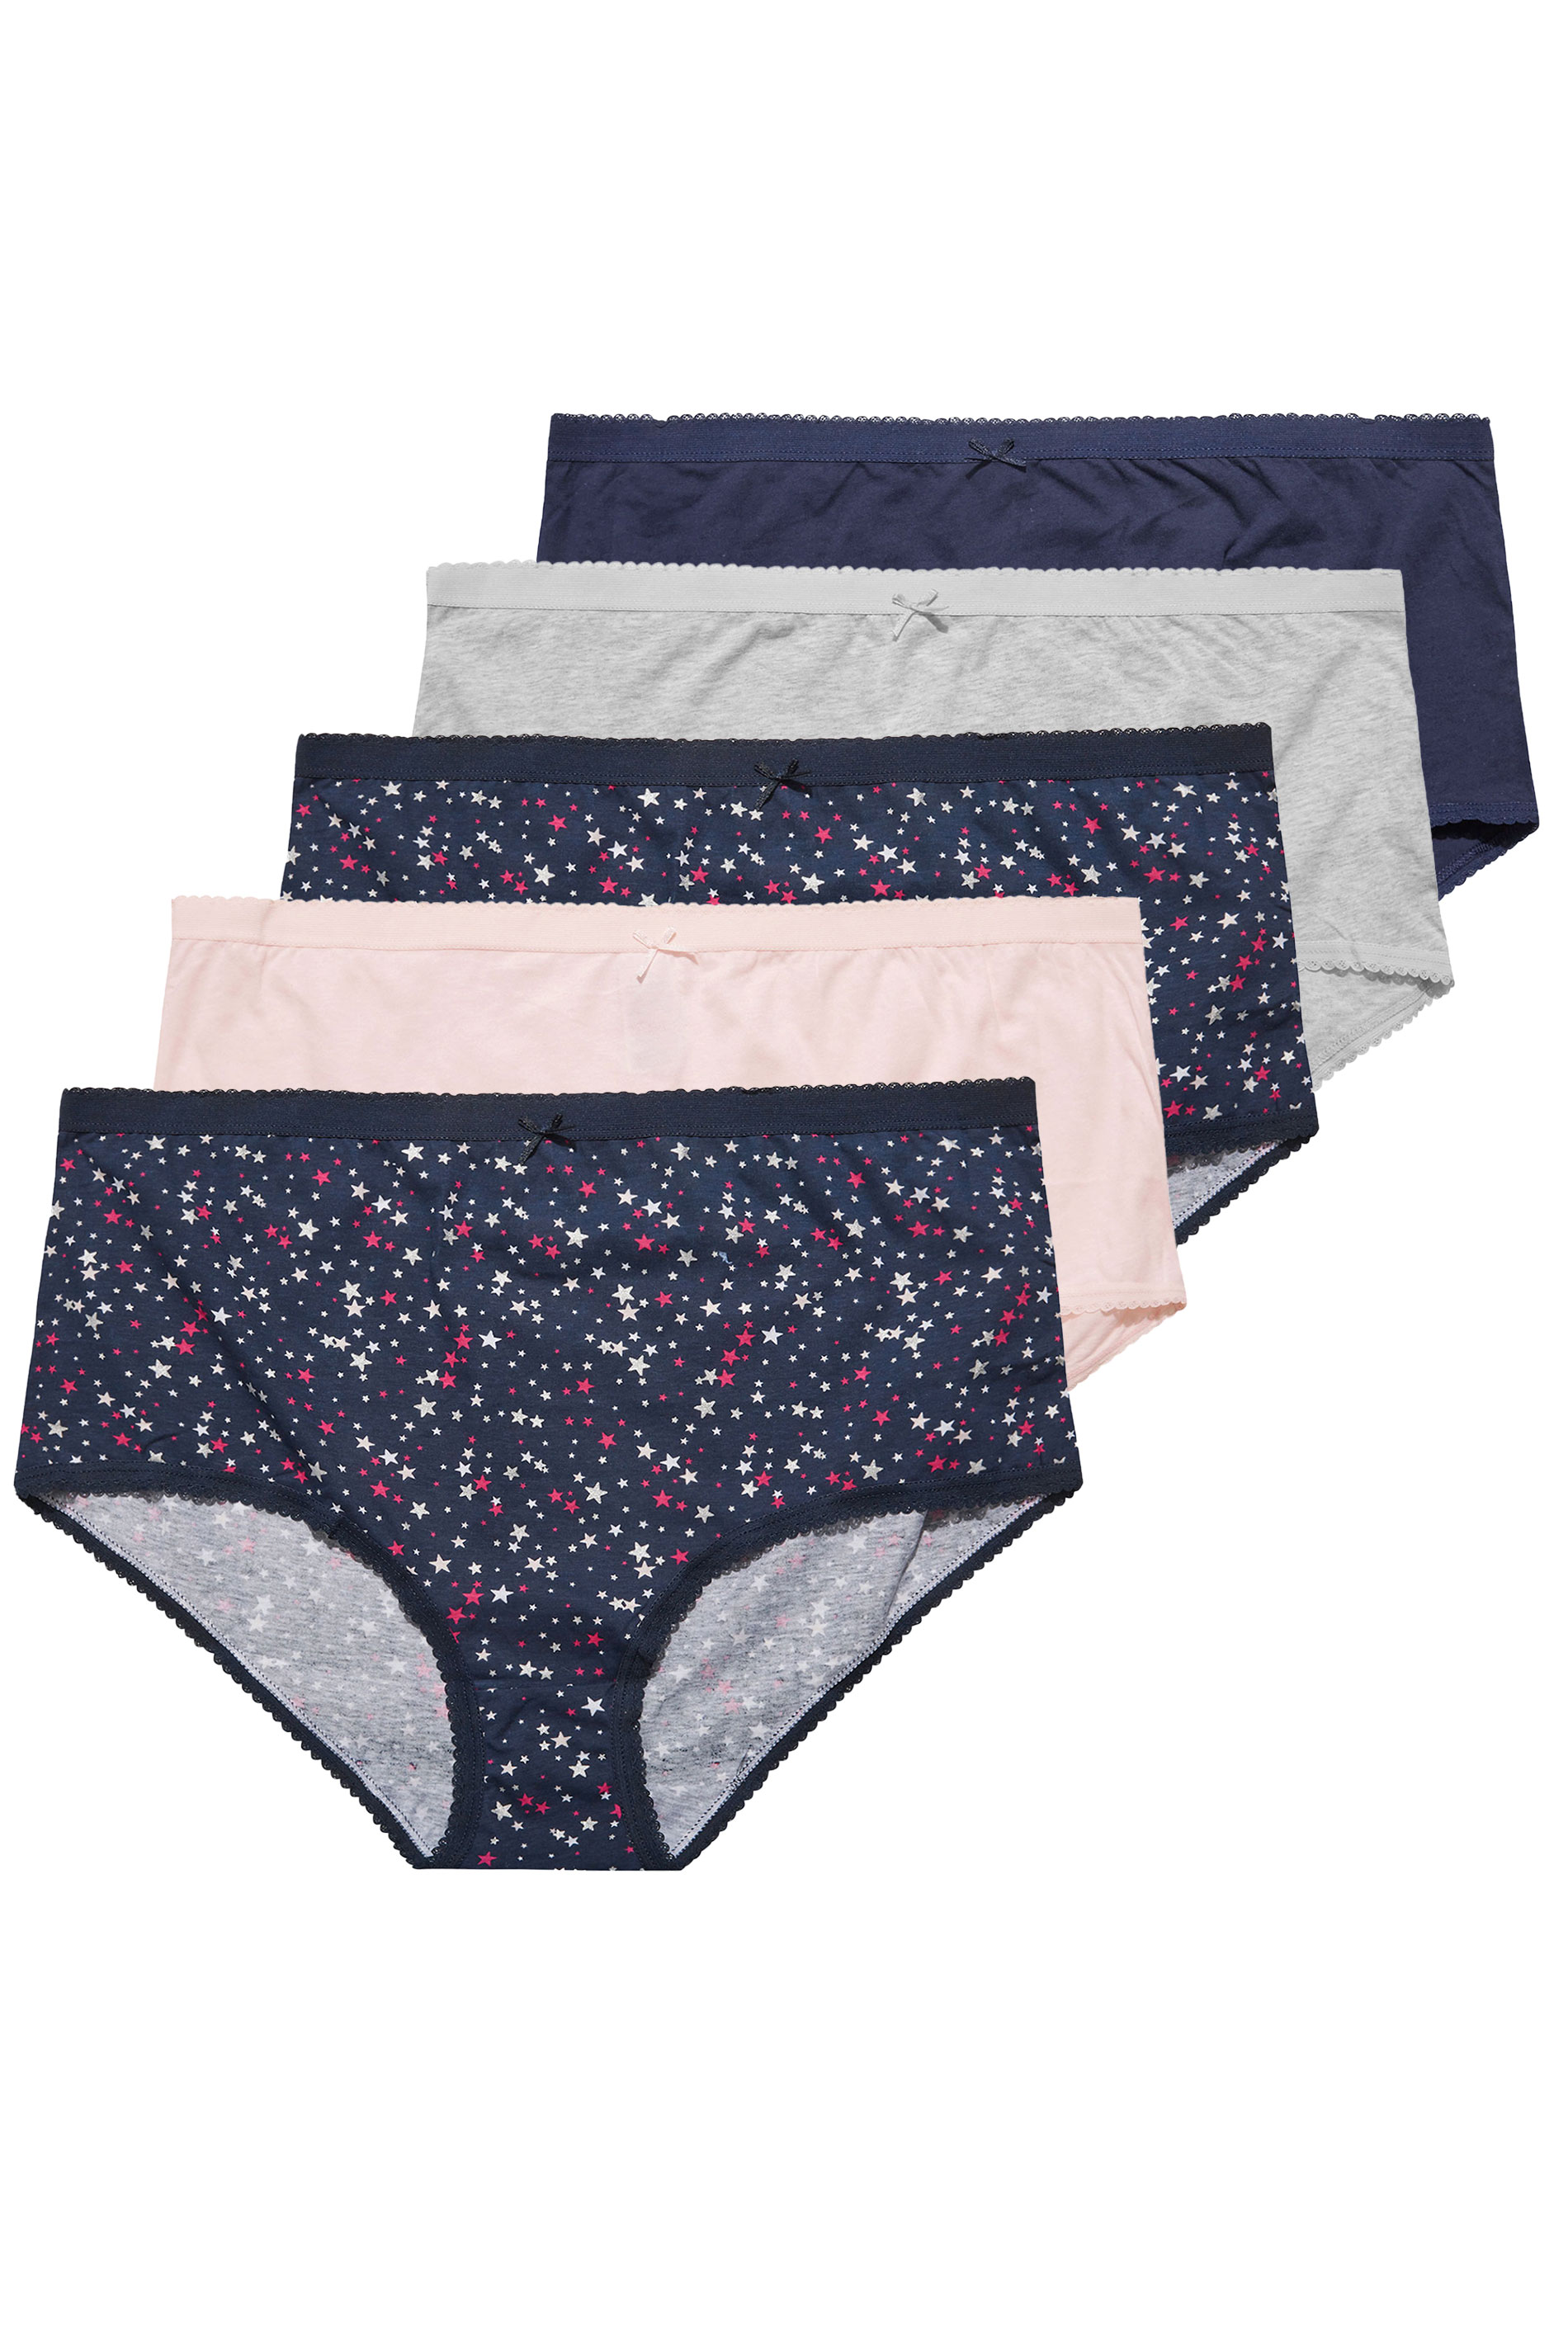 Grande taille  Petites Culottes Grande taille  Lots Culottes | 5 PACK Curve Navy Blue Star Full Briefs - RX26652